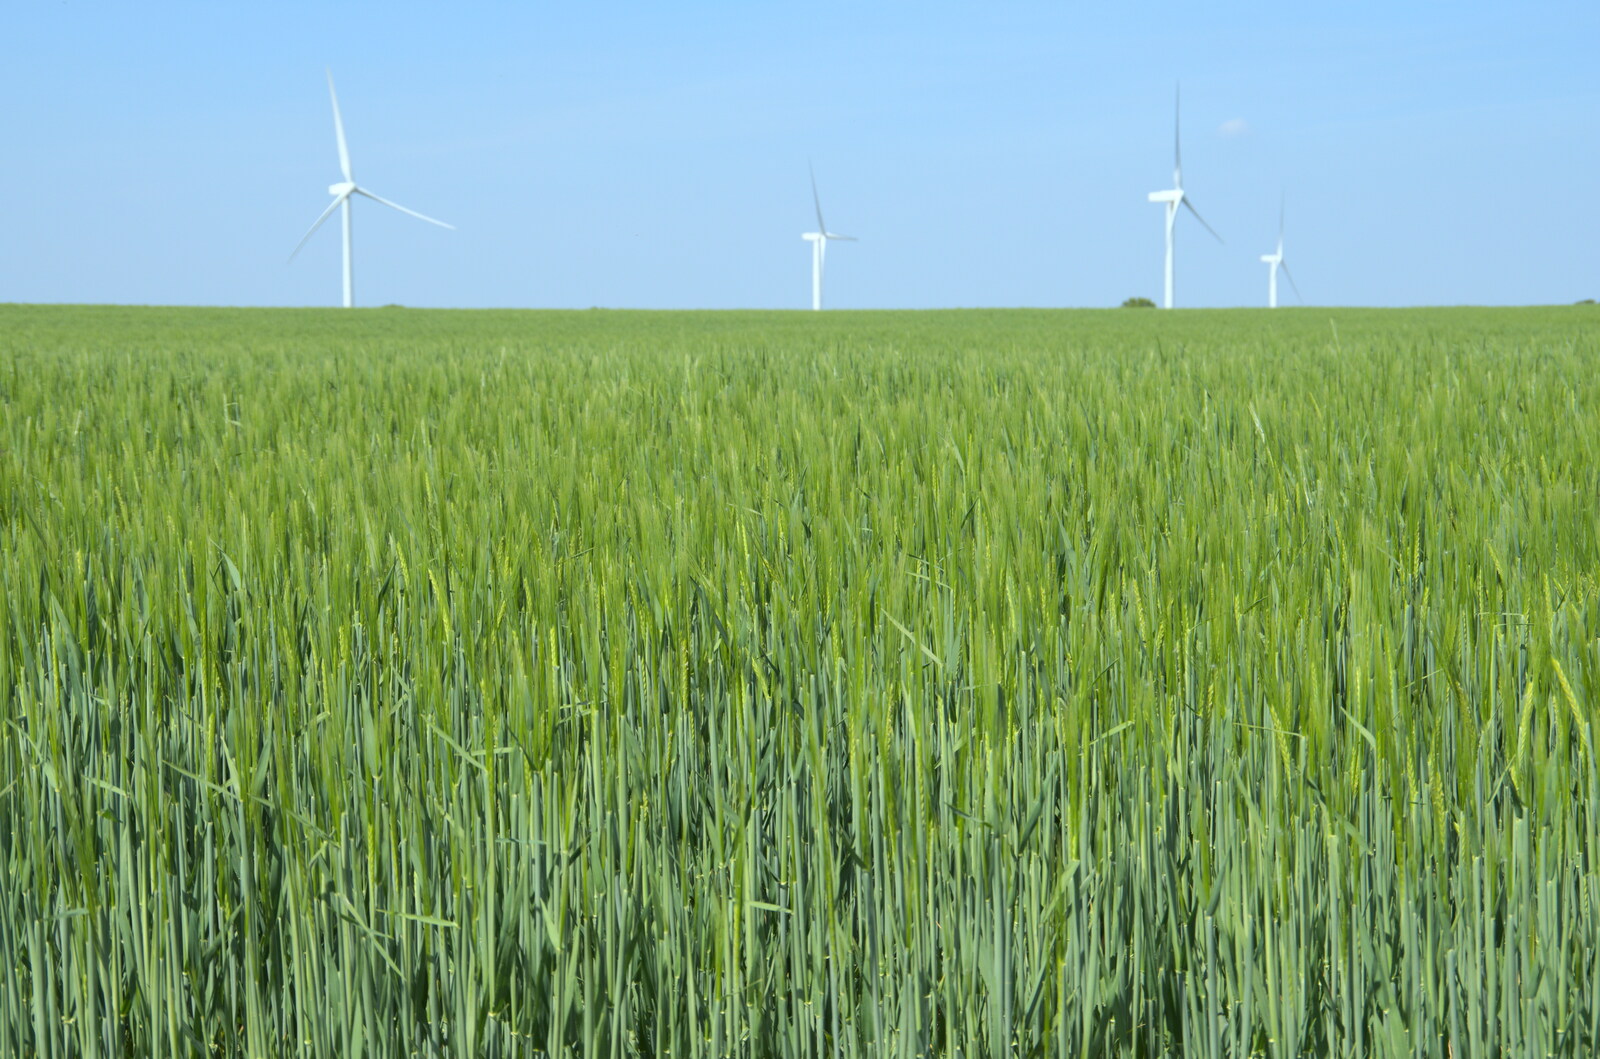 The wind turbines and a field of barley from A Walk up Rapsy Tapsy Lane, Eye, Suffolk - 9th May 2020